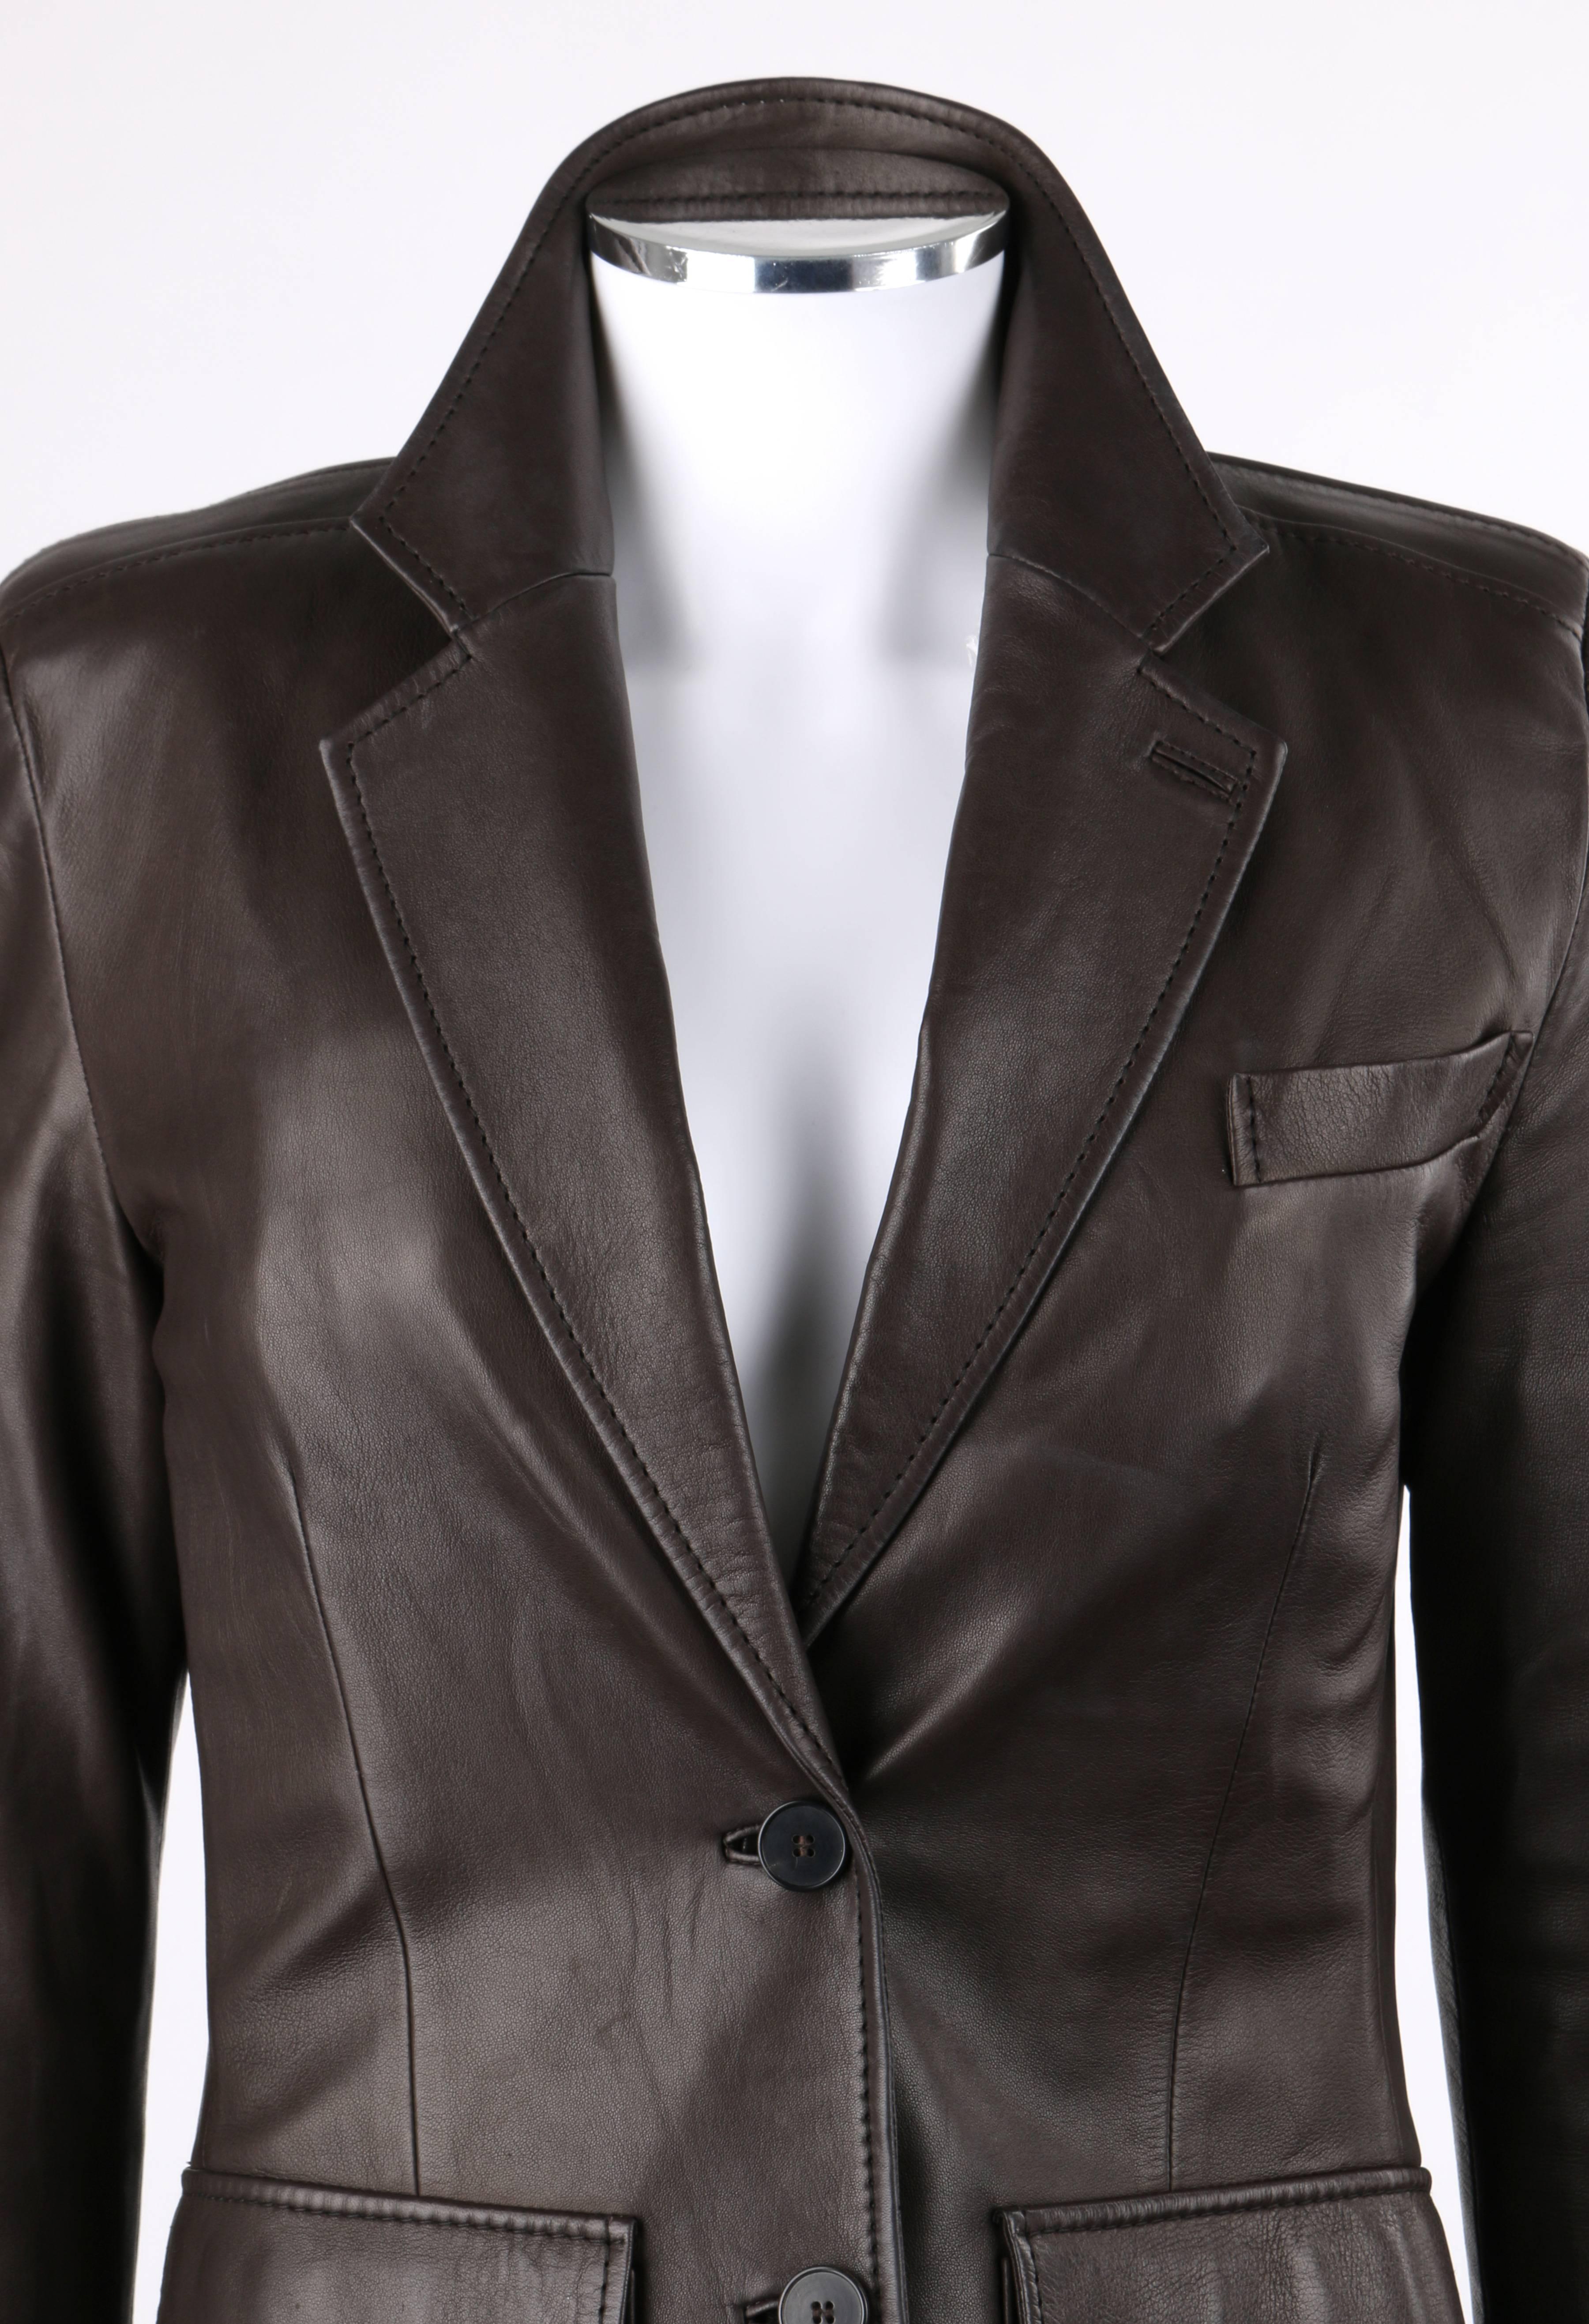 Yves Saint Laurent YSL brown leather two button blazer. Notched lapel collar with single button hole detail at lapel. Long sleeves with inset panel from neckline to cuff and four hidden button closures at cuff. Two center front button closures. Two